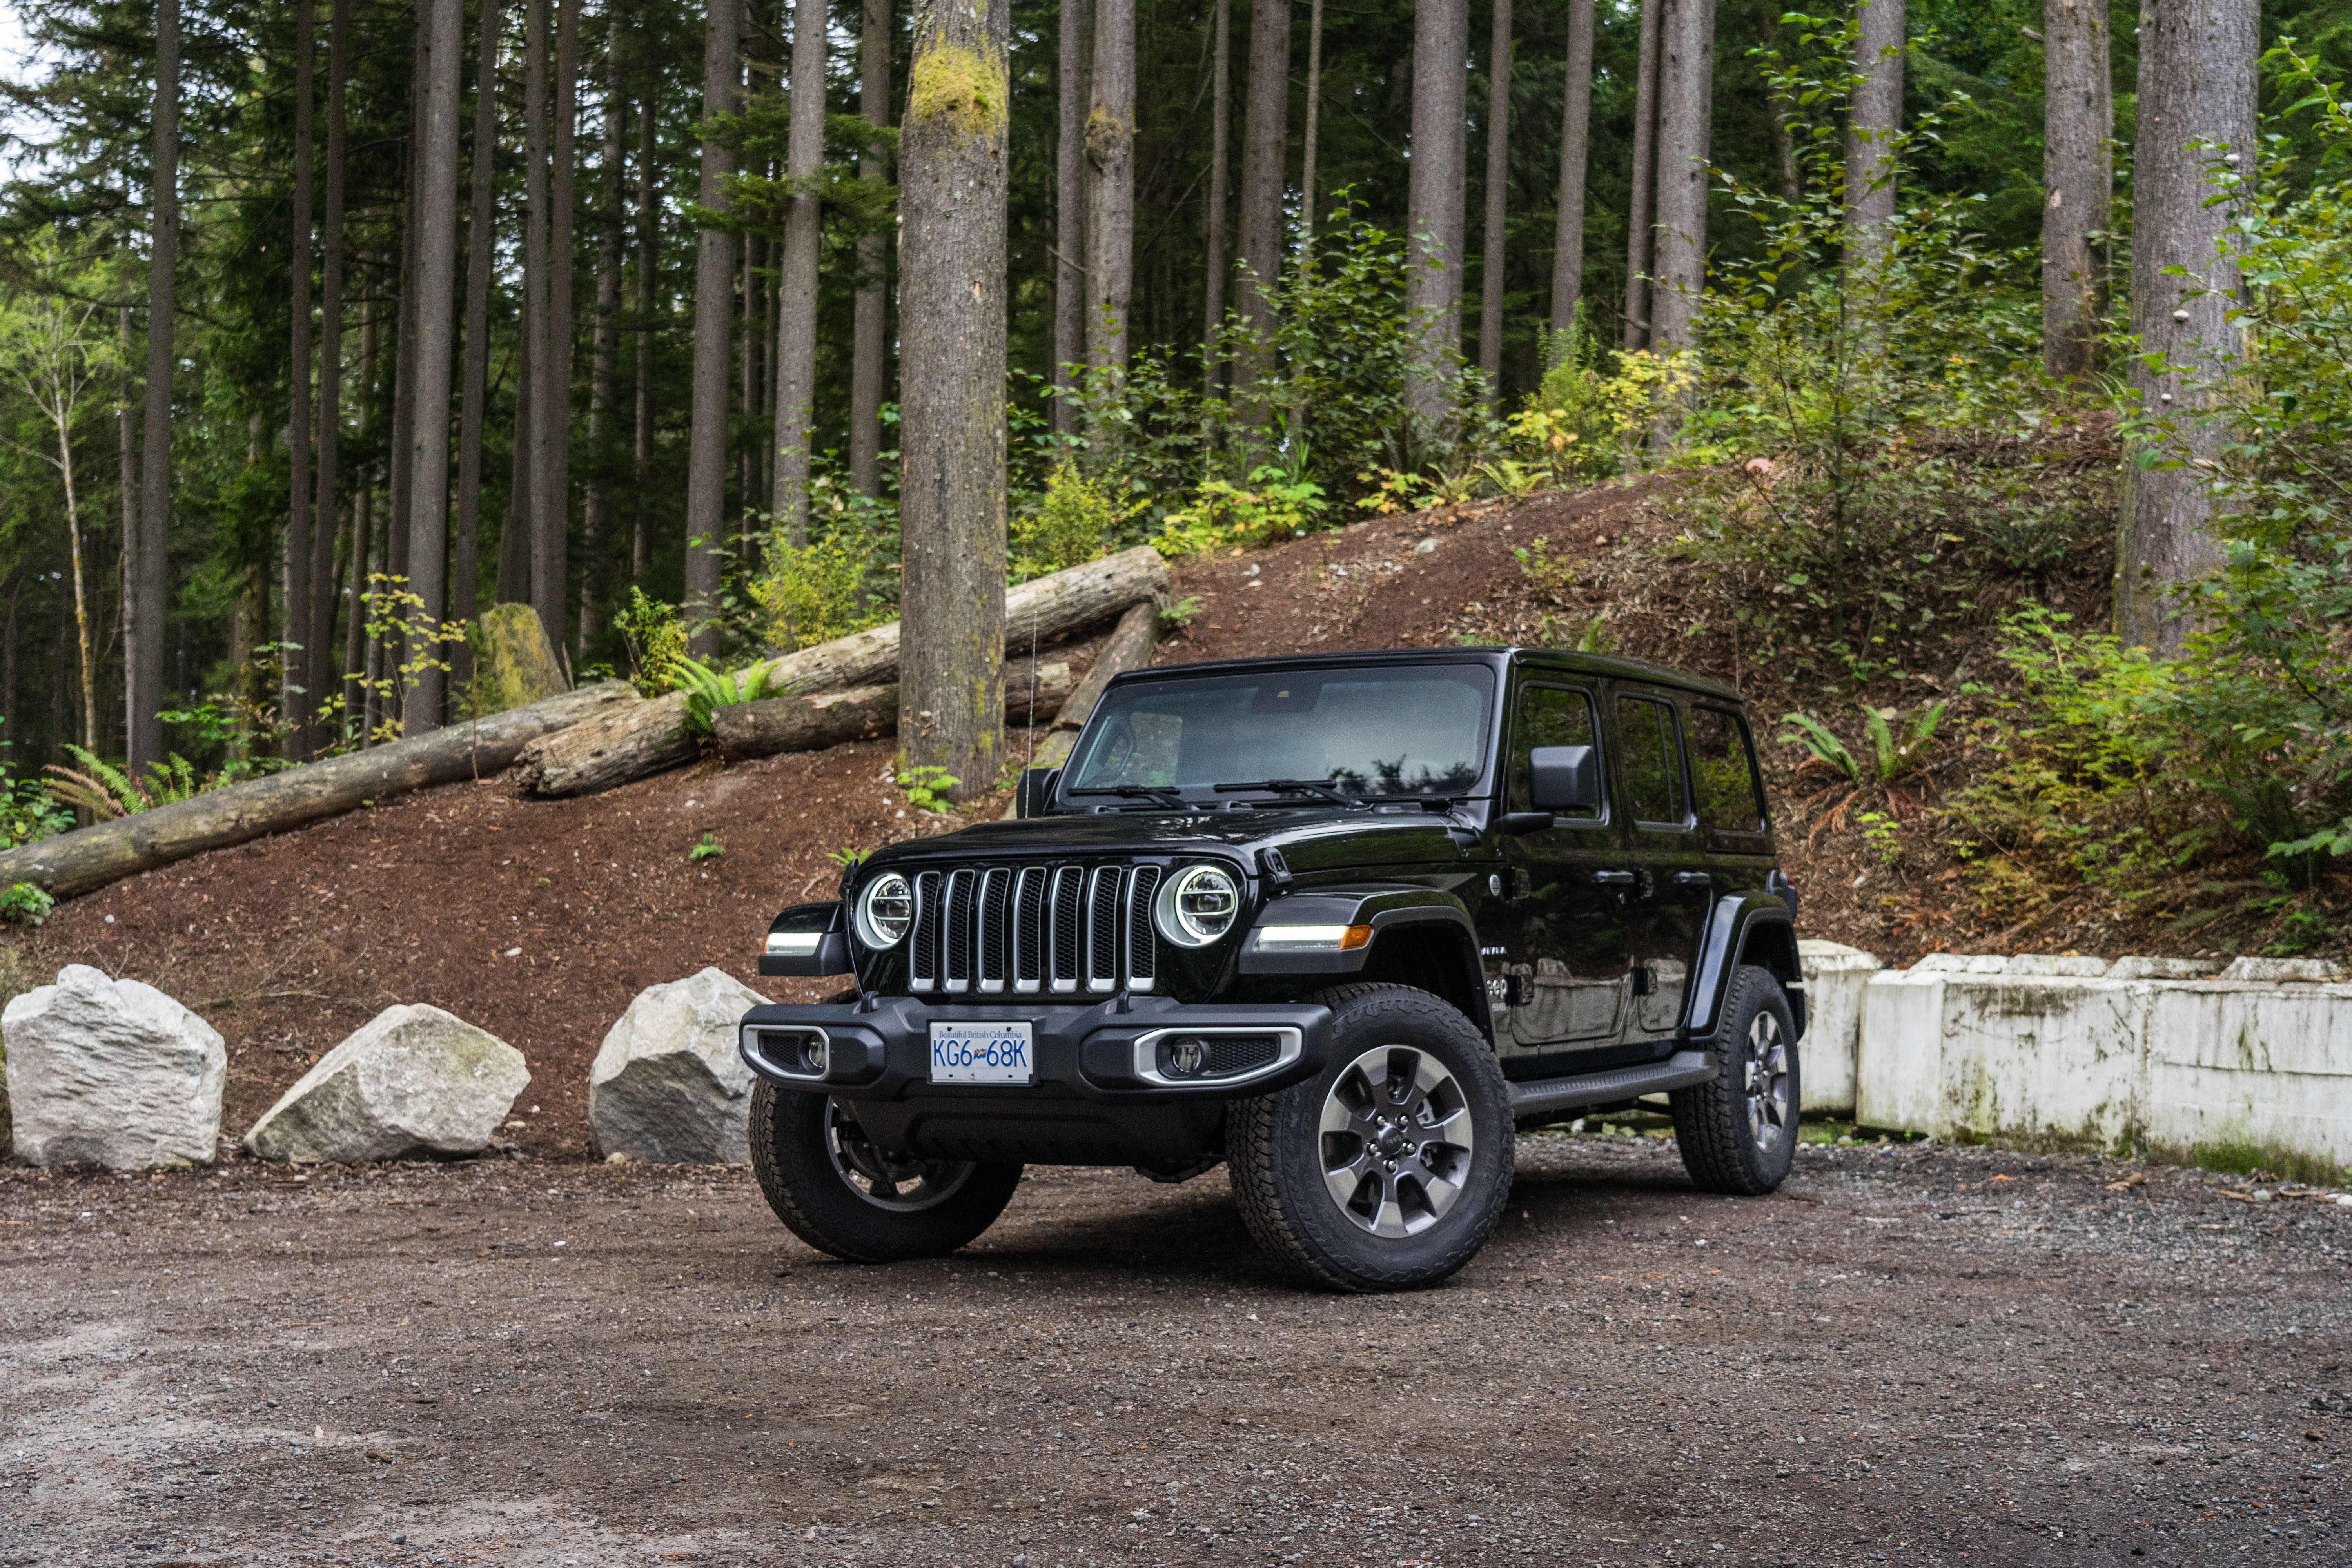 Review: The 2020 Jeep Wrangler is still an unmatched drive, even if it's a  bit miscast as a family car - The Globe and Mail